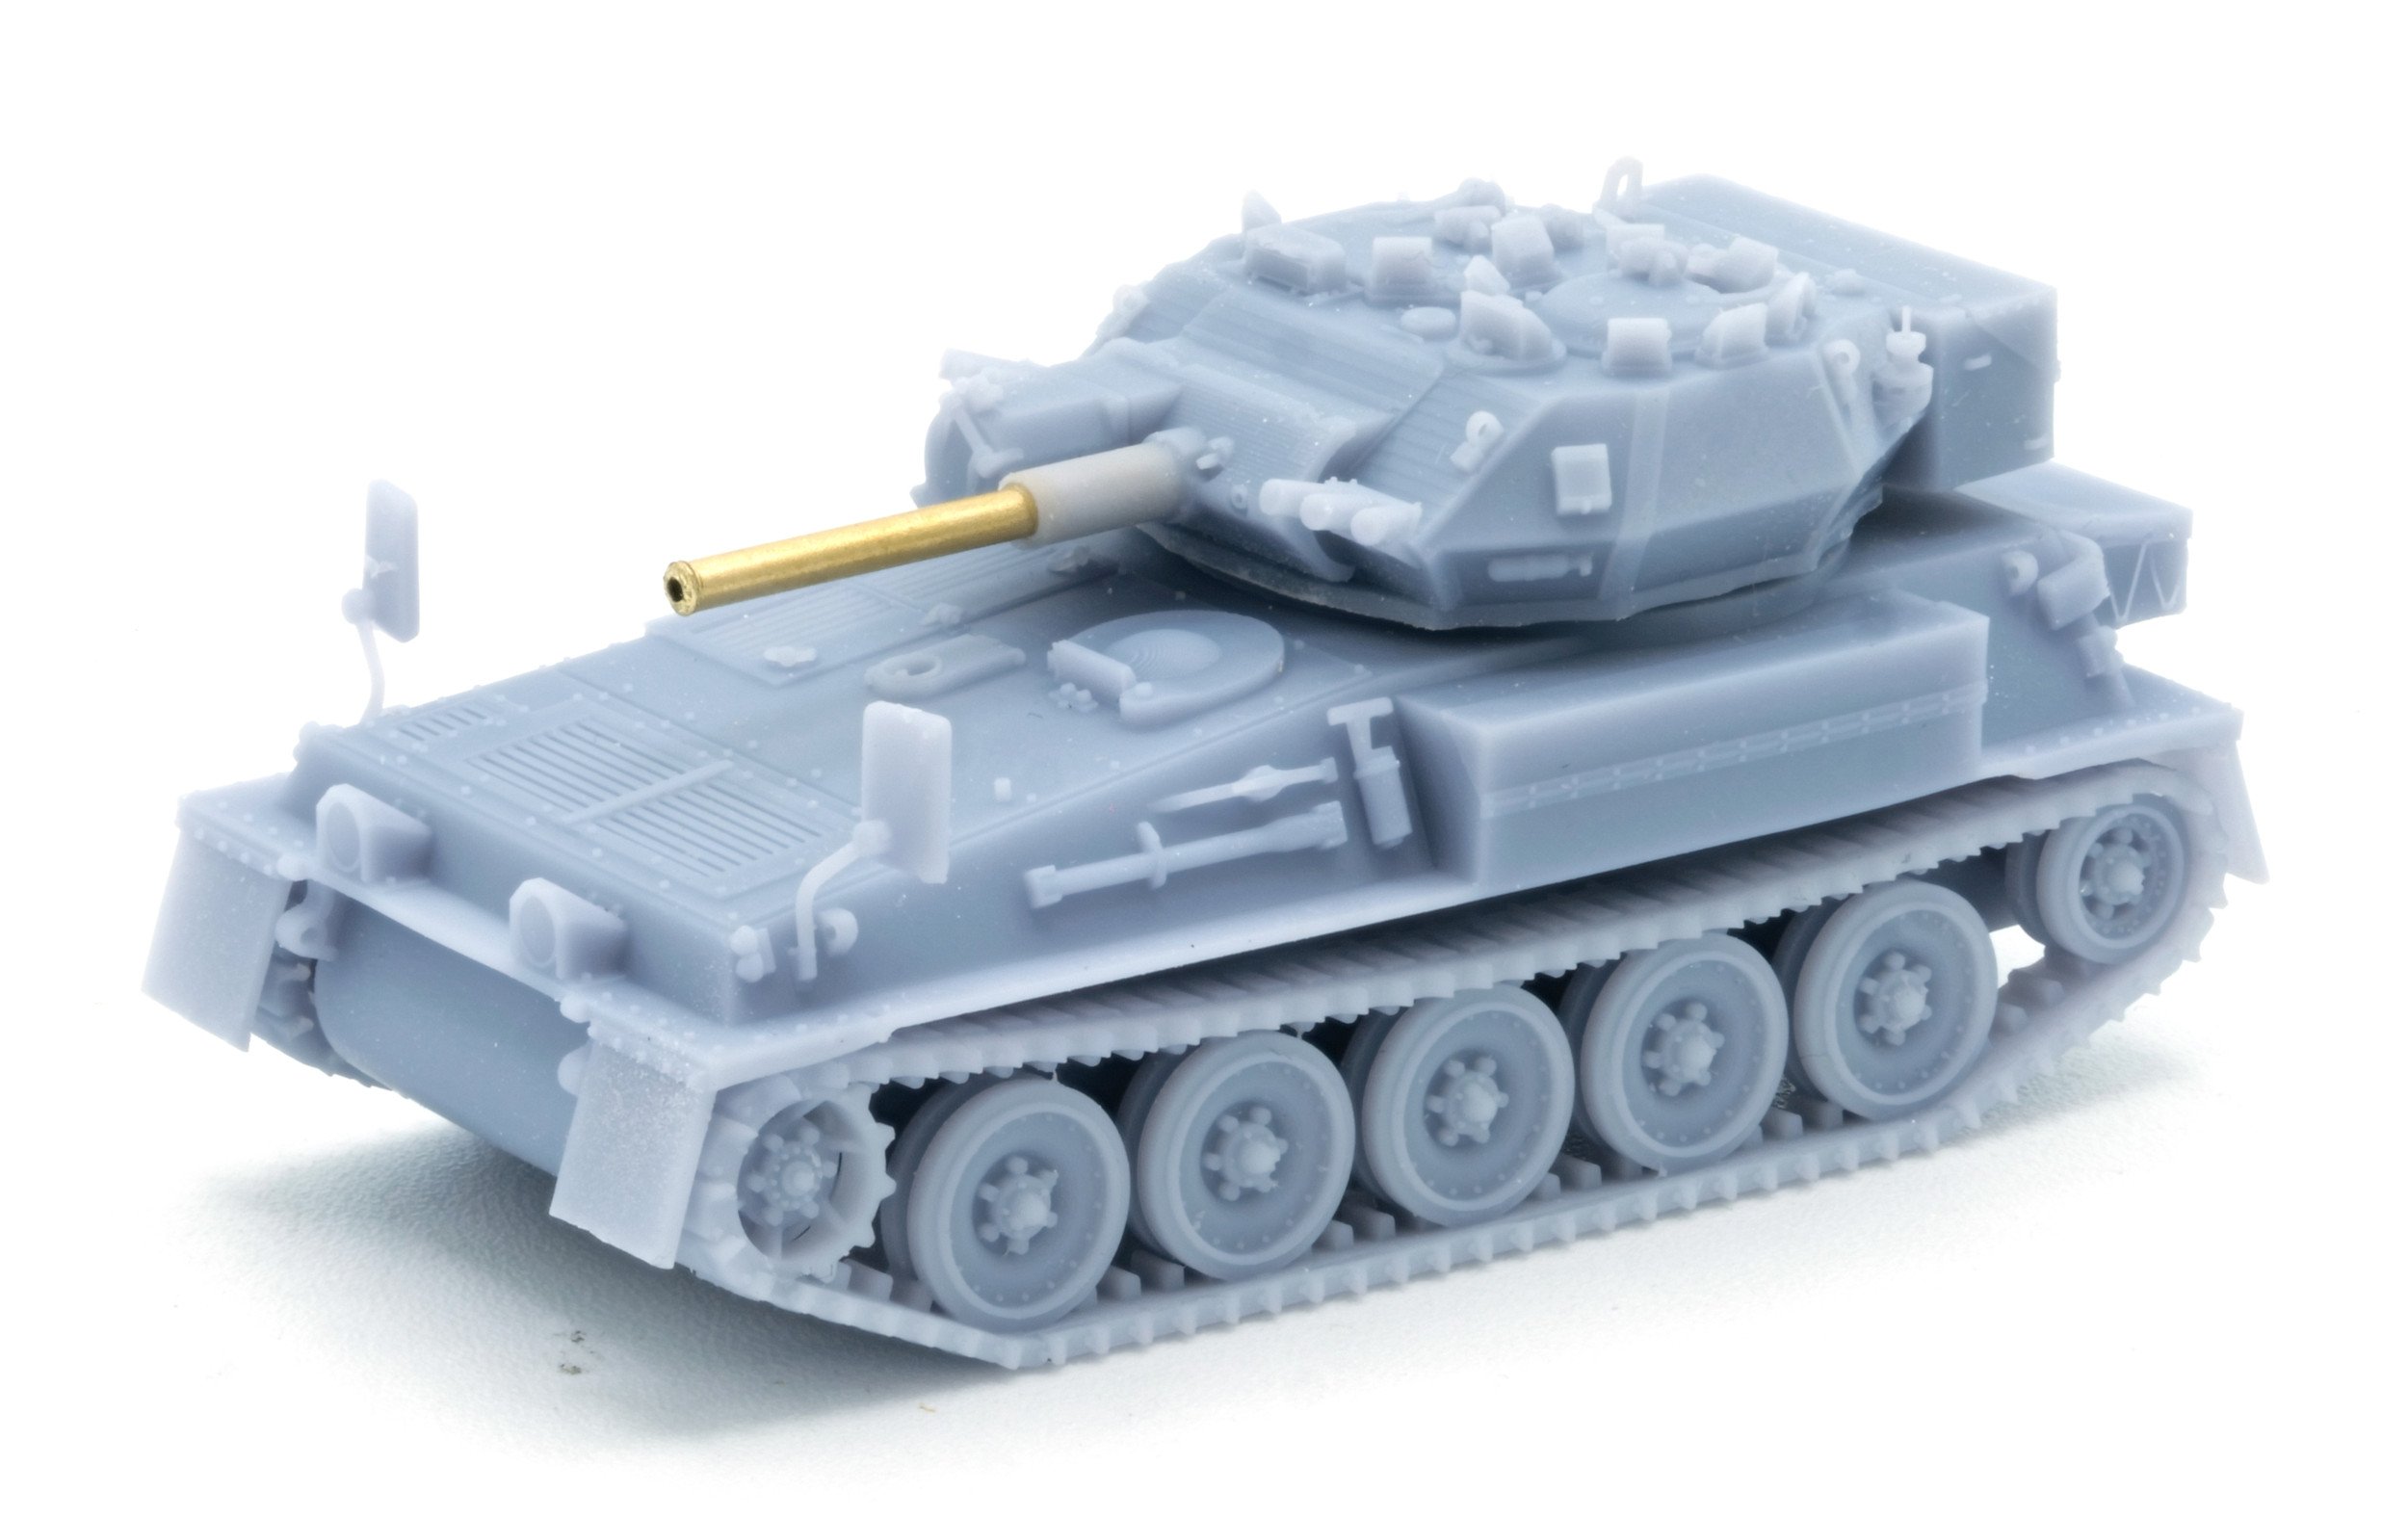 The new FV101 Scorpian kit is 3D printed and available exclusively from the Key Model World Shop.